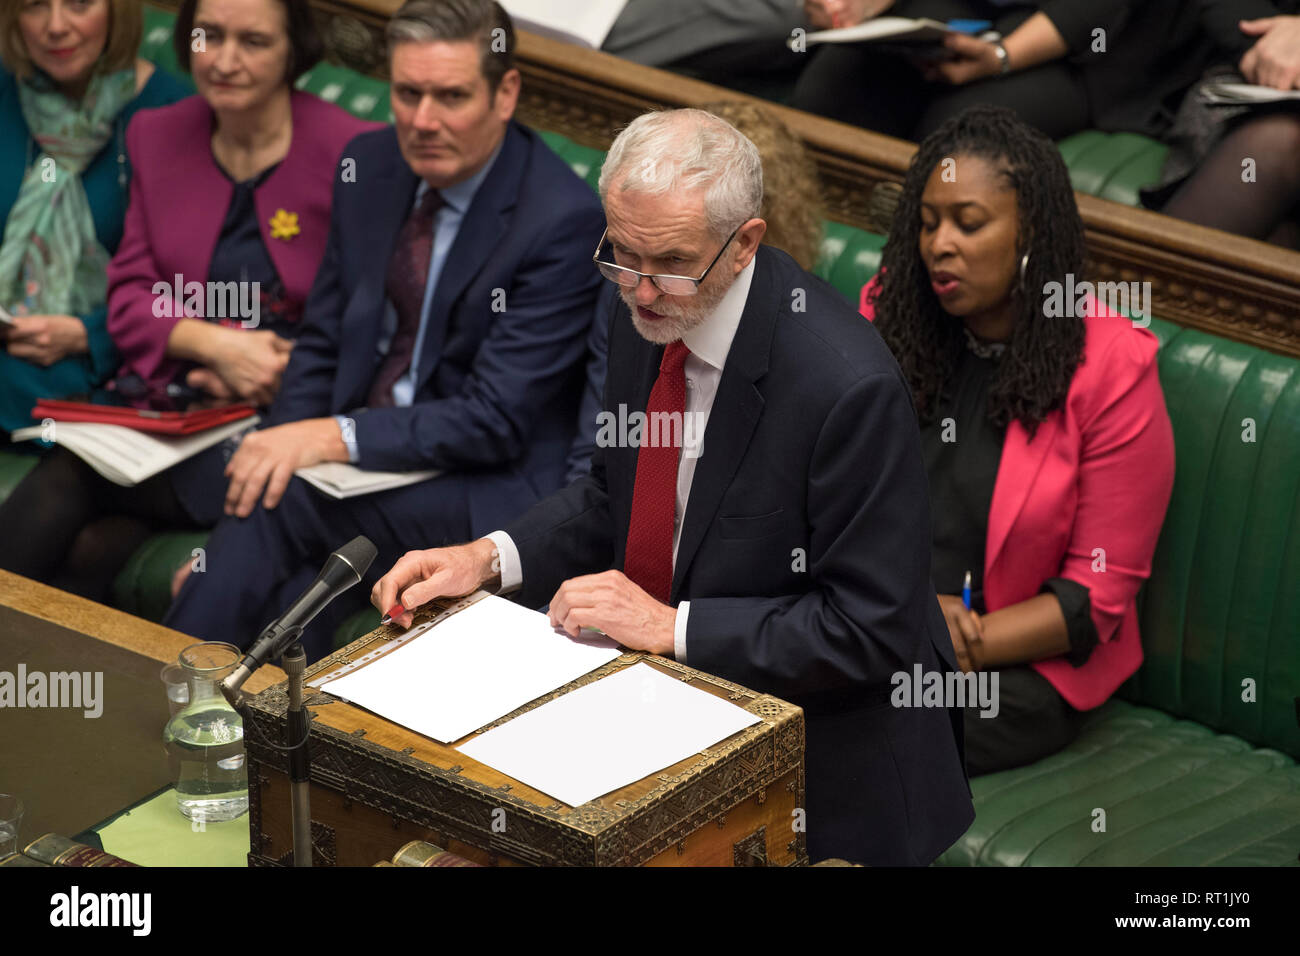 London, Britain. 27th Feb, 2019. British Labour Party leader Jeremy Corbyn attends the Prime Minister's Questions in the House of Commons in London, Britain, on Feb. 27, 2019. Theresa May promised on Tuesday that the members of parliament (MPs) would be given a choice to vote on no-deal Brexit or delayed departure from the European Union (EU) if her deal is rejected in a meaningful vote in mid-March. Credit: British Parliament/Mark Duffy/Xinhua/Alamy Live News Stock Photo